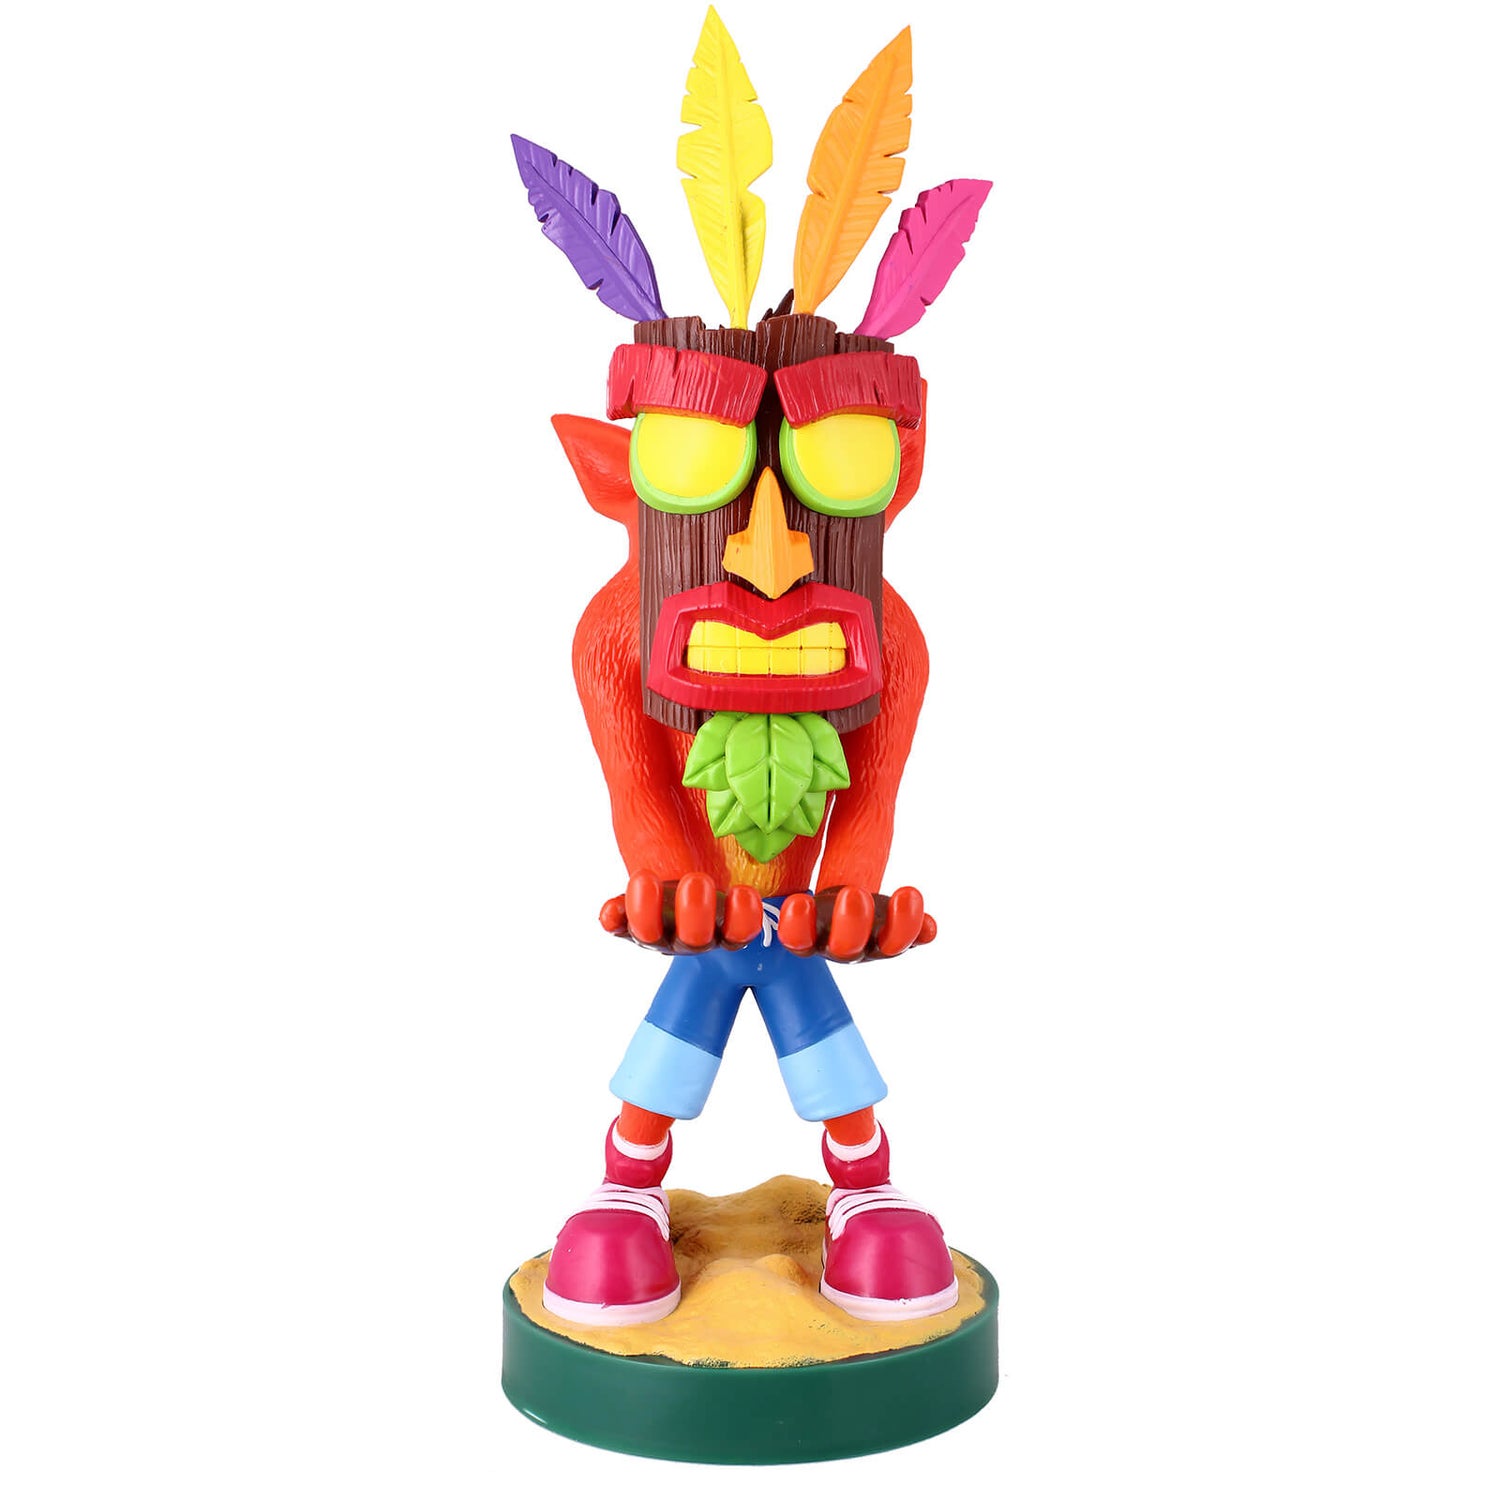 Cable Guy Crash Bandicoot Controller Holder - 8 inch version